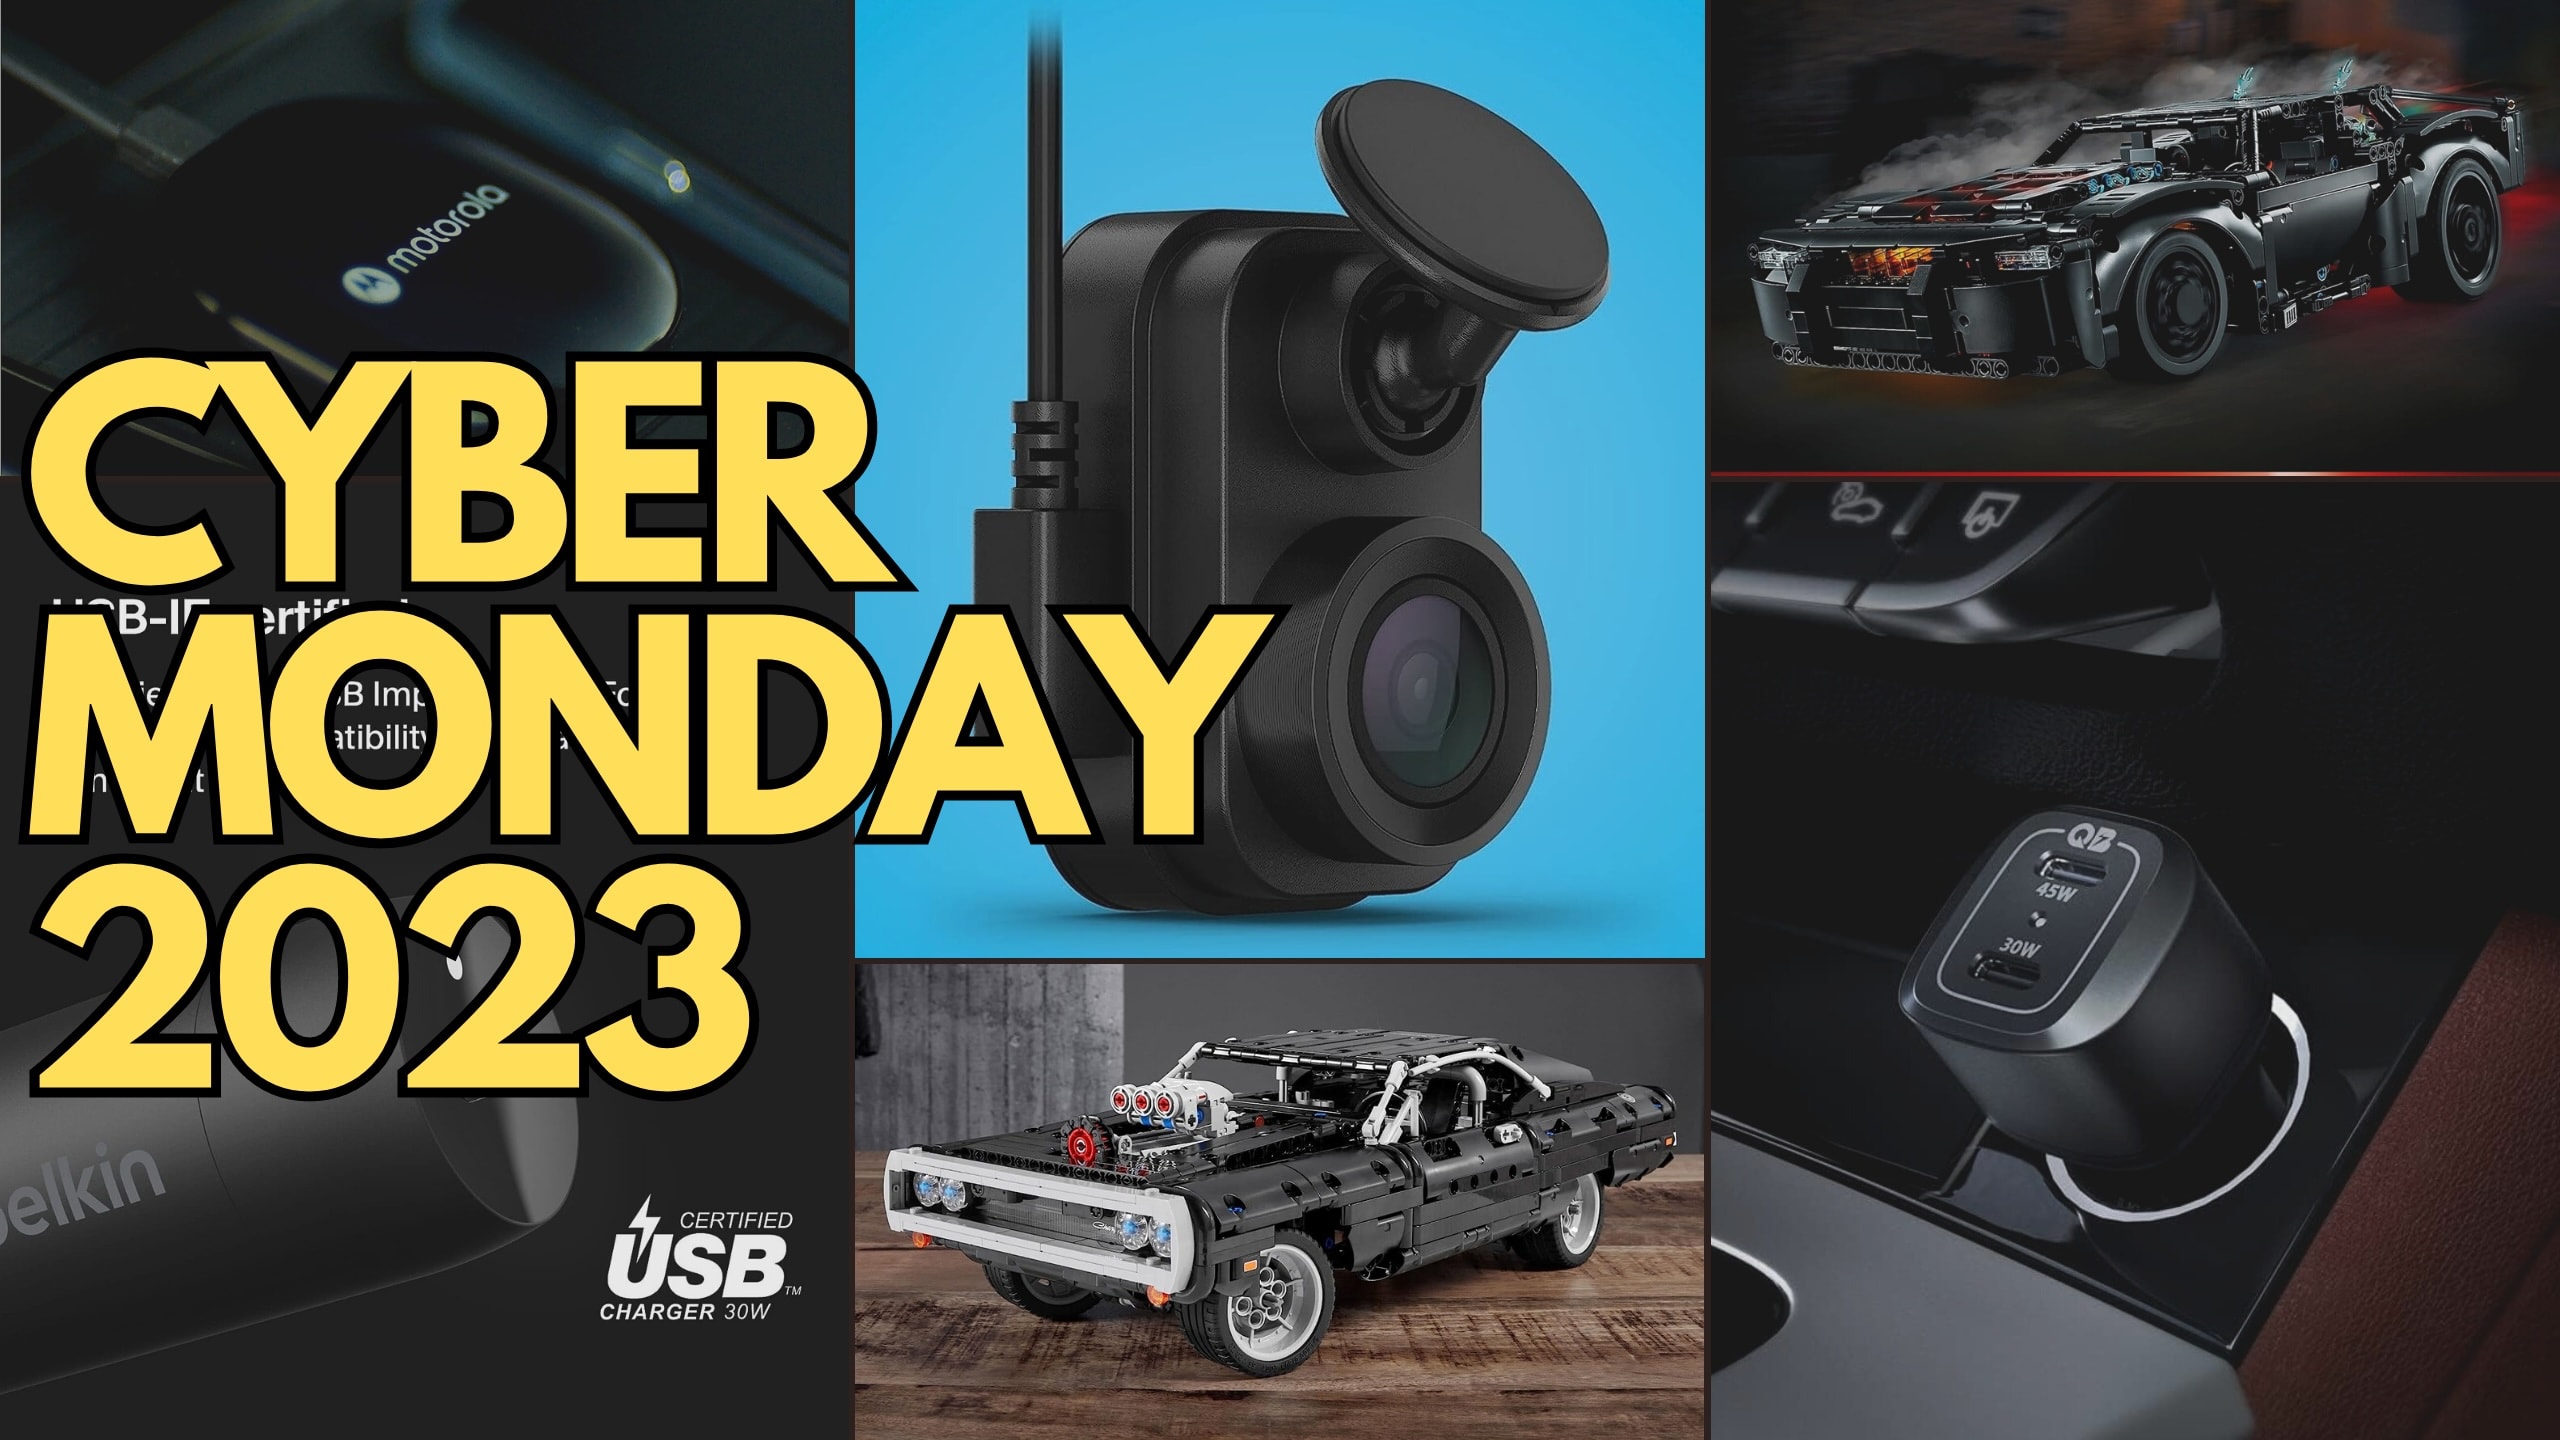 https://s1.cdn.autoevolution.com/images/news/cyber-monday-2023-best-deals-under-100-for-android-auto-and-carplay-adapters-dash-cams-225142_1.jpg